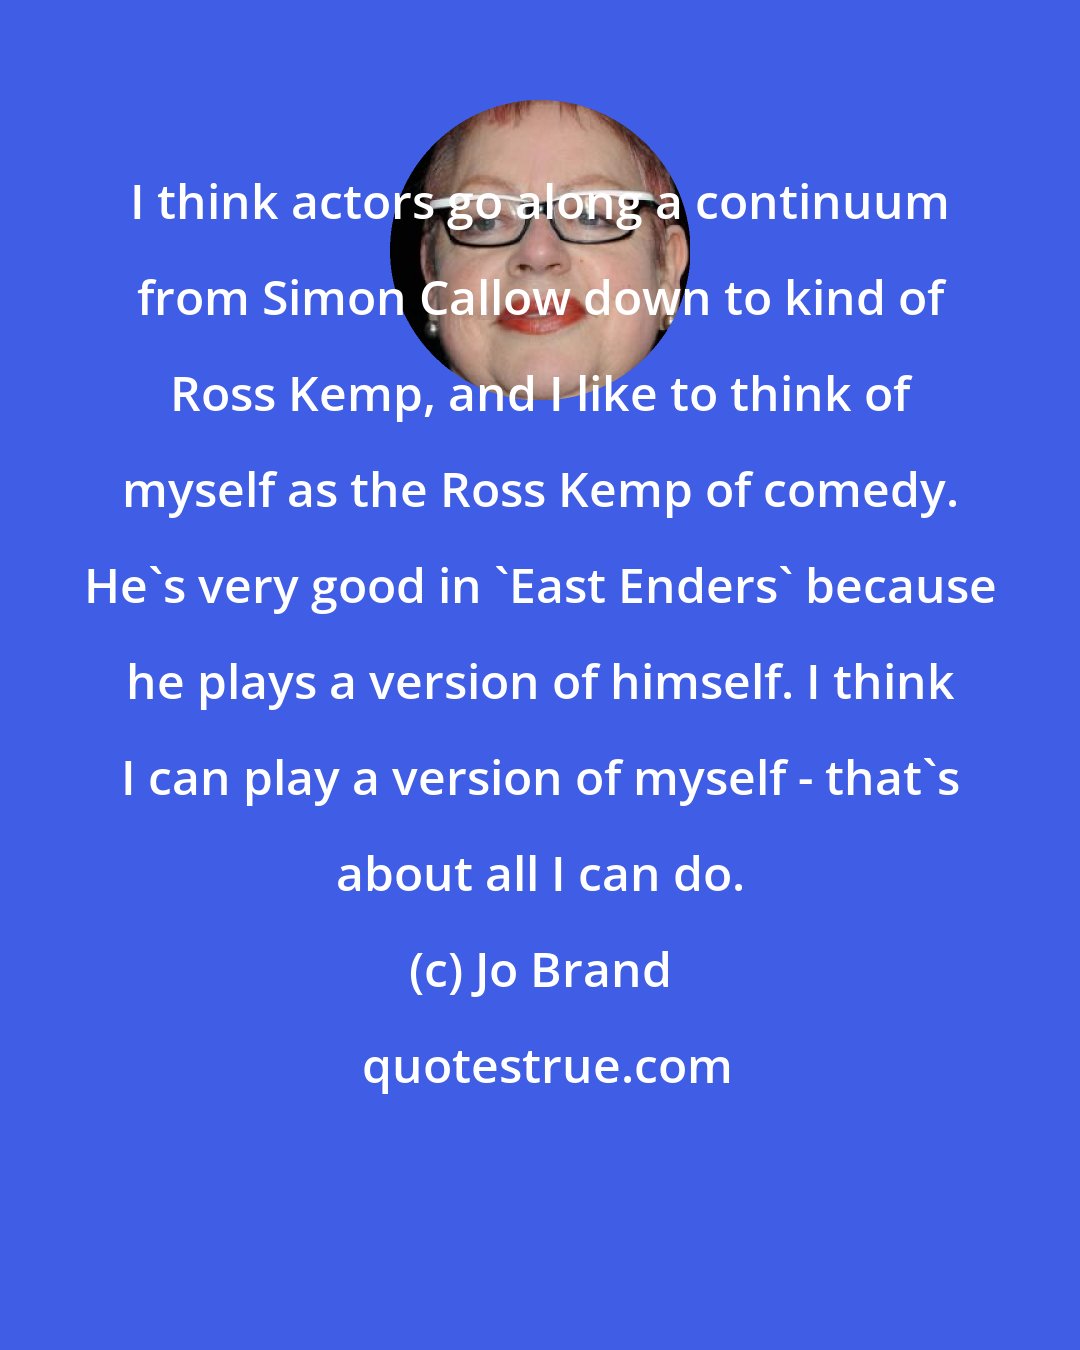 Jo Brand: I think actors go along a continuum from Simon Callow down to kind of Ross Kemp, and I like to think of myself as the Ross Kemp of comedy. He's very good in 'East Enders' because he plays a version of himself. I think I can play a version of myself - that's about all I can do.